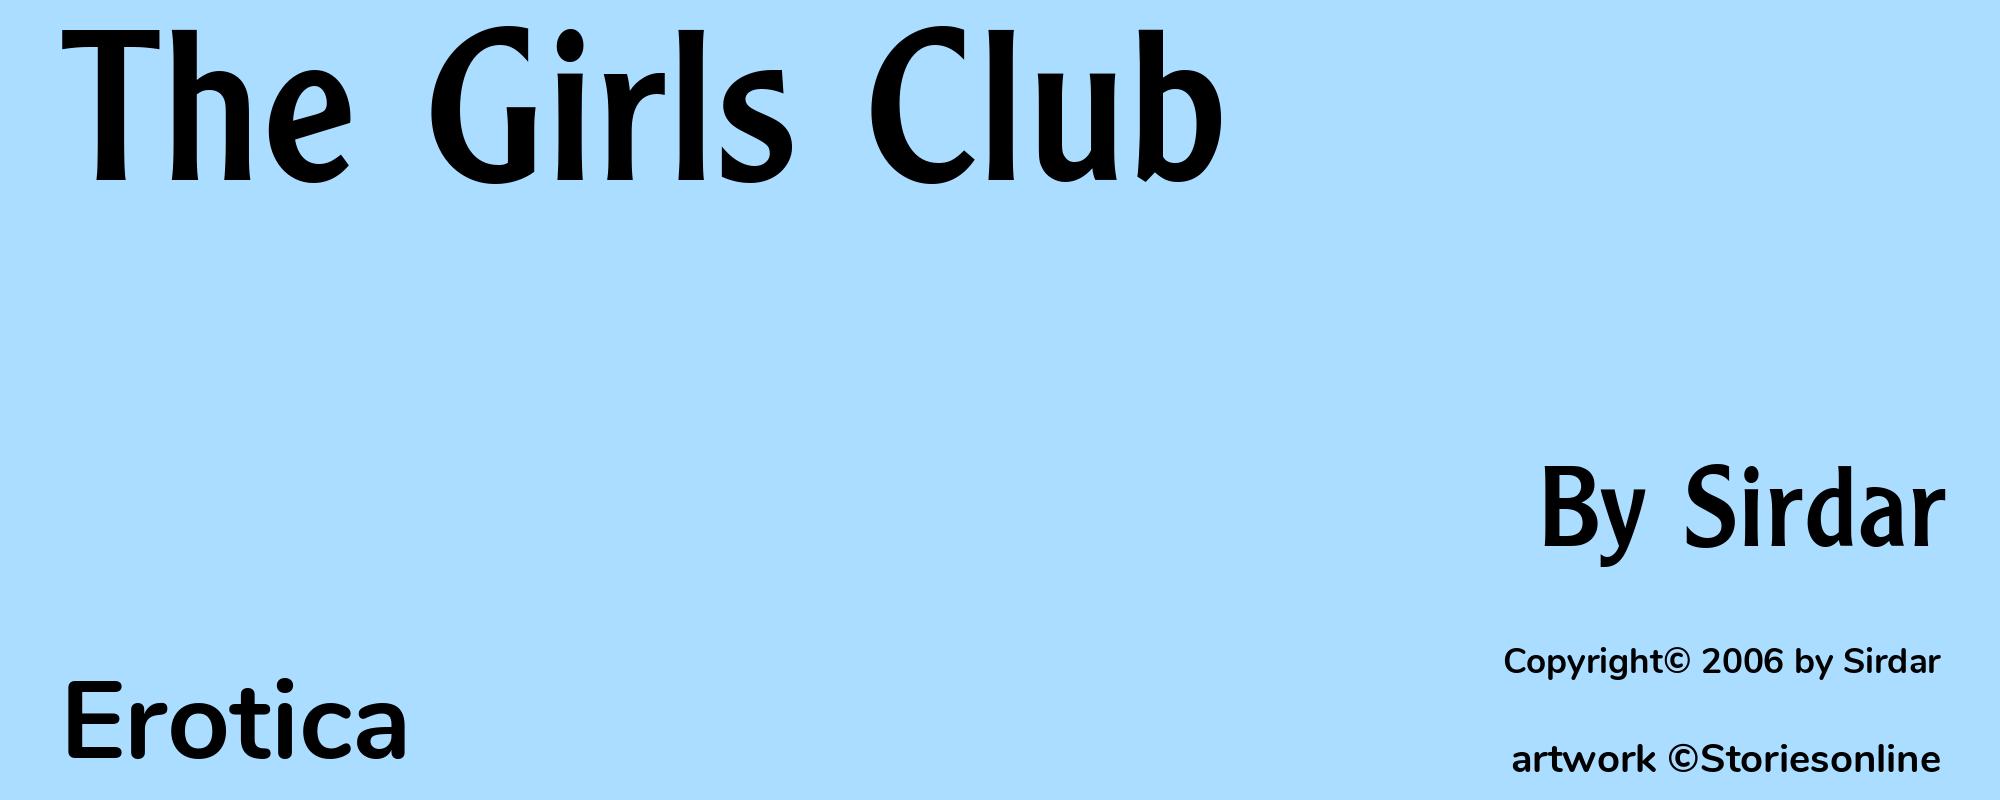 The Girls Club - Cover